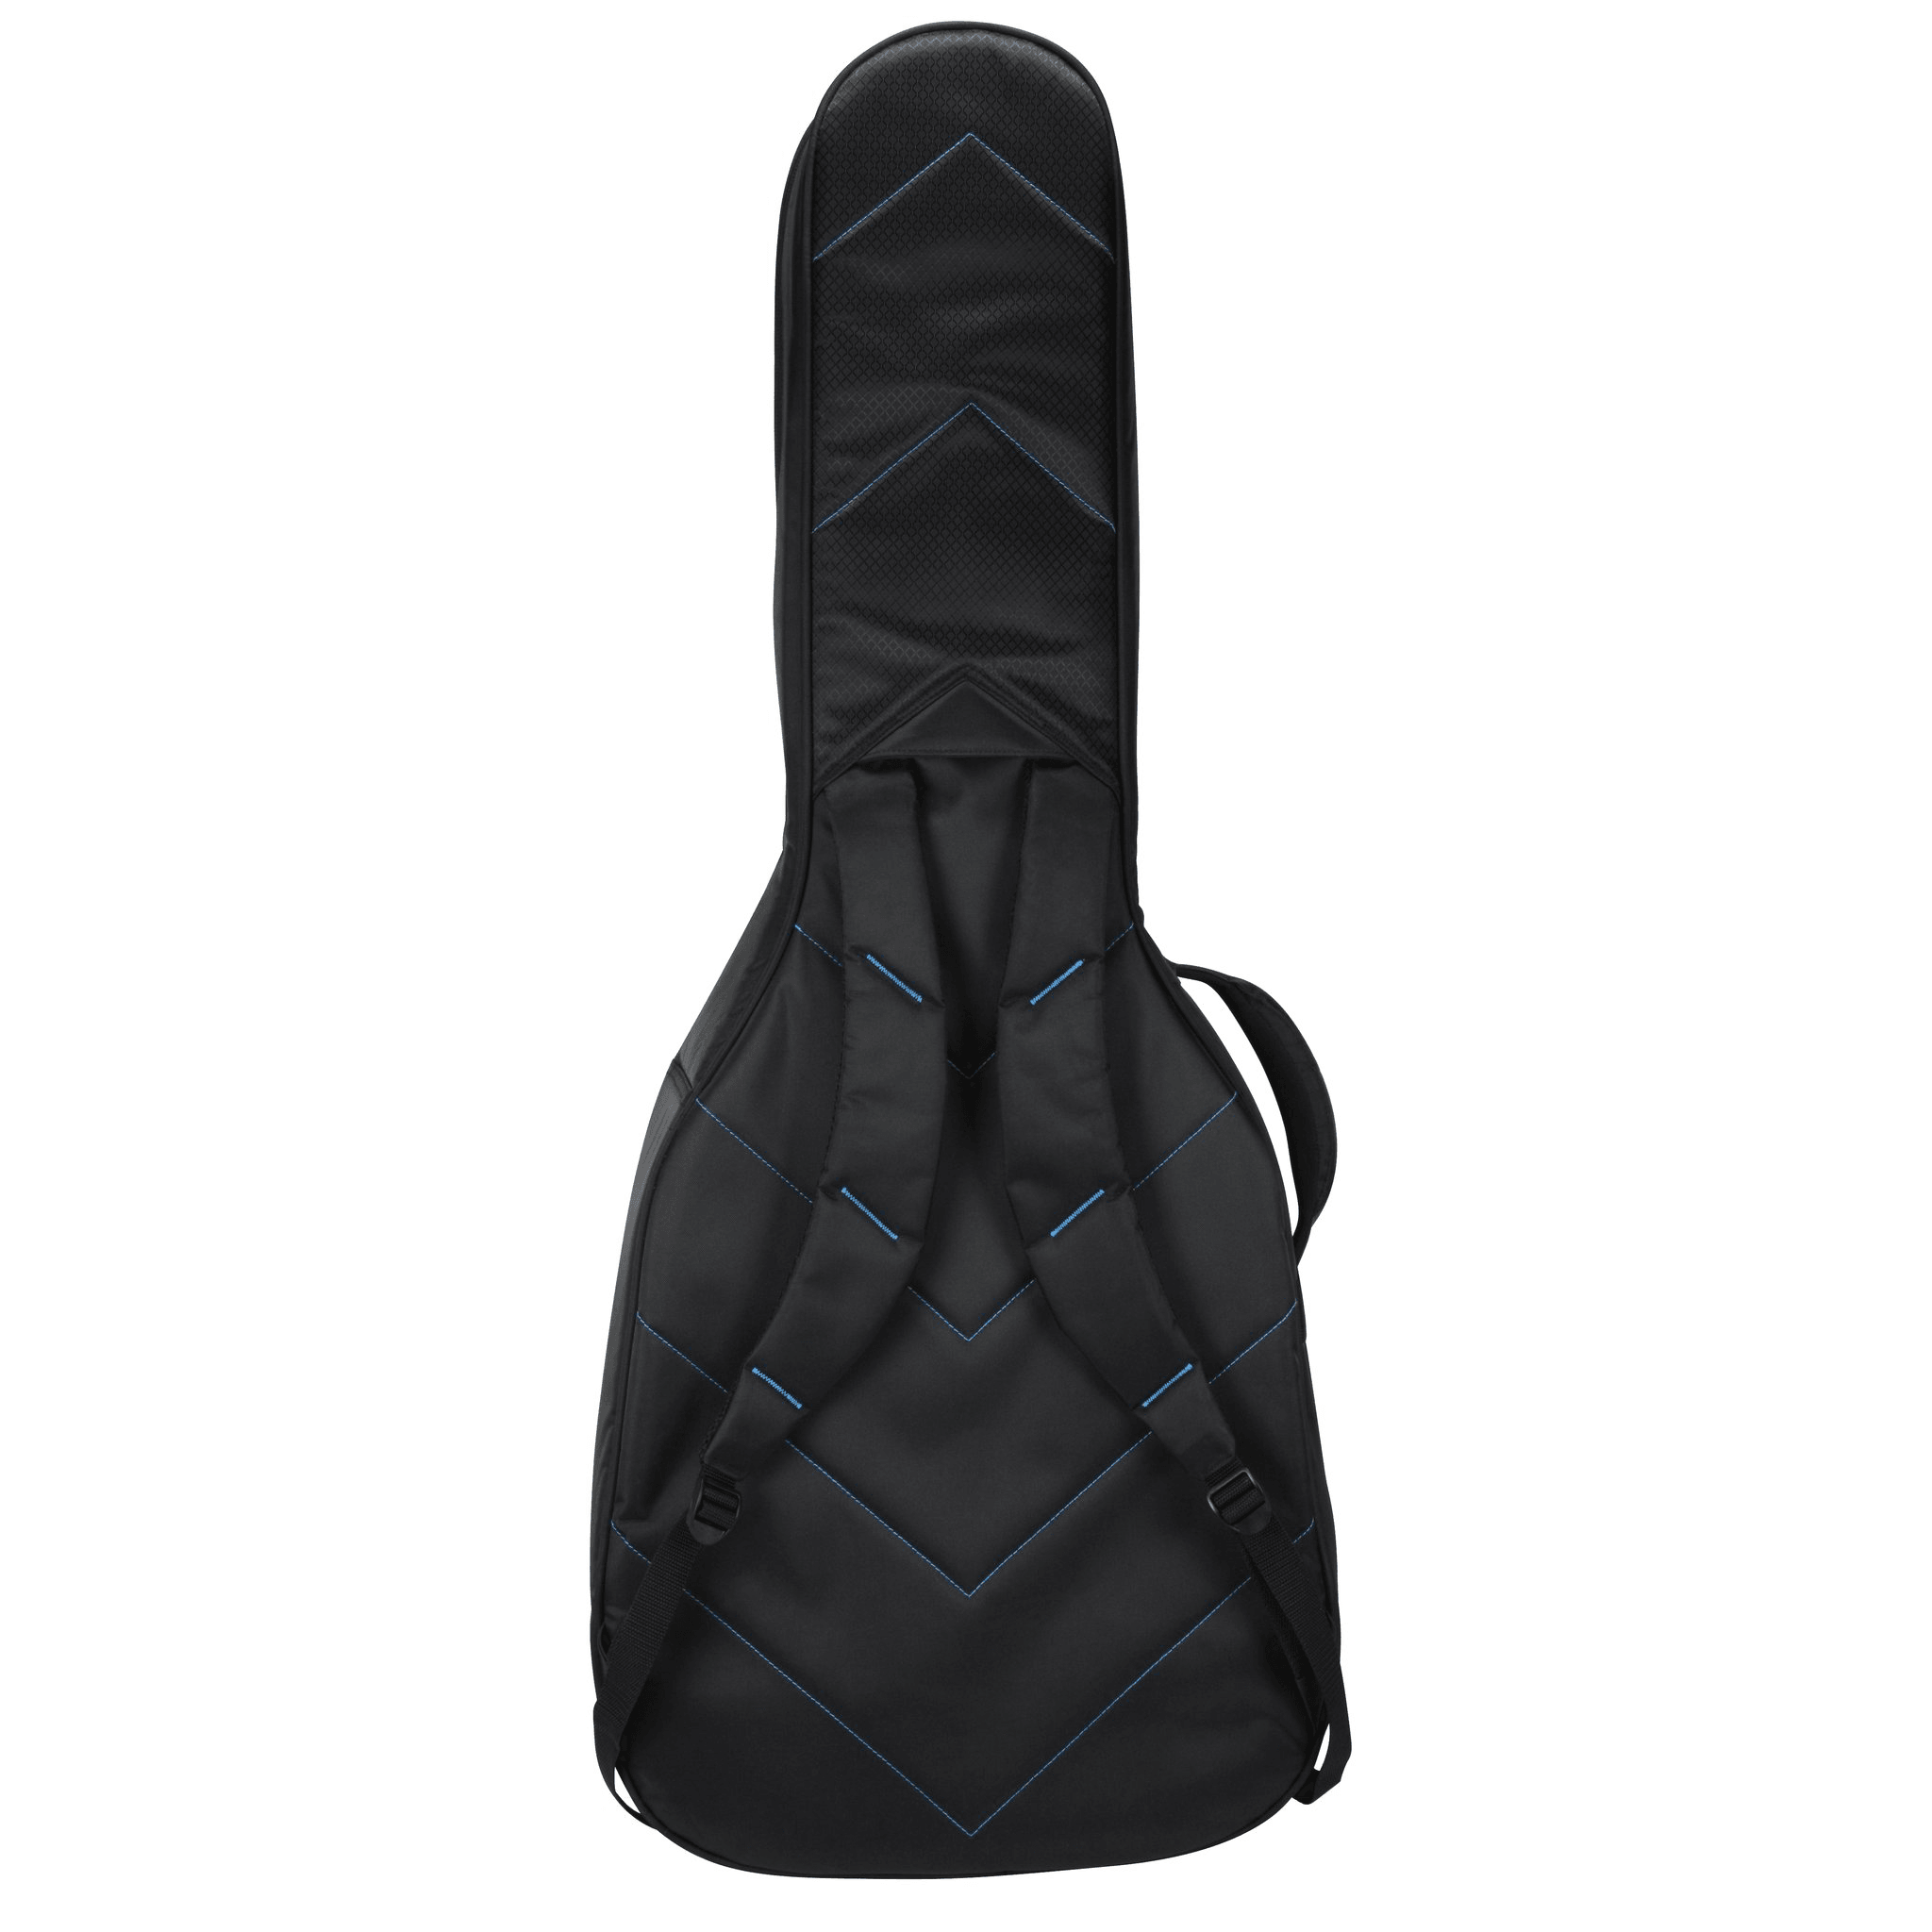 Reunion Blues Rbx Acoustic Guitar Gig Bag - Cases & Bags by Reunion Blues at Muso's Stuff